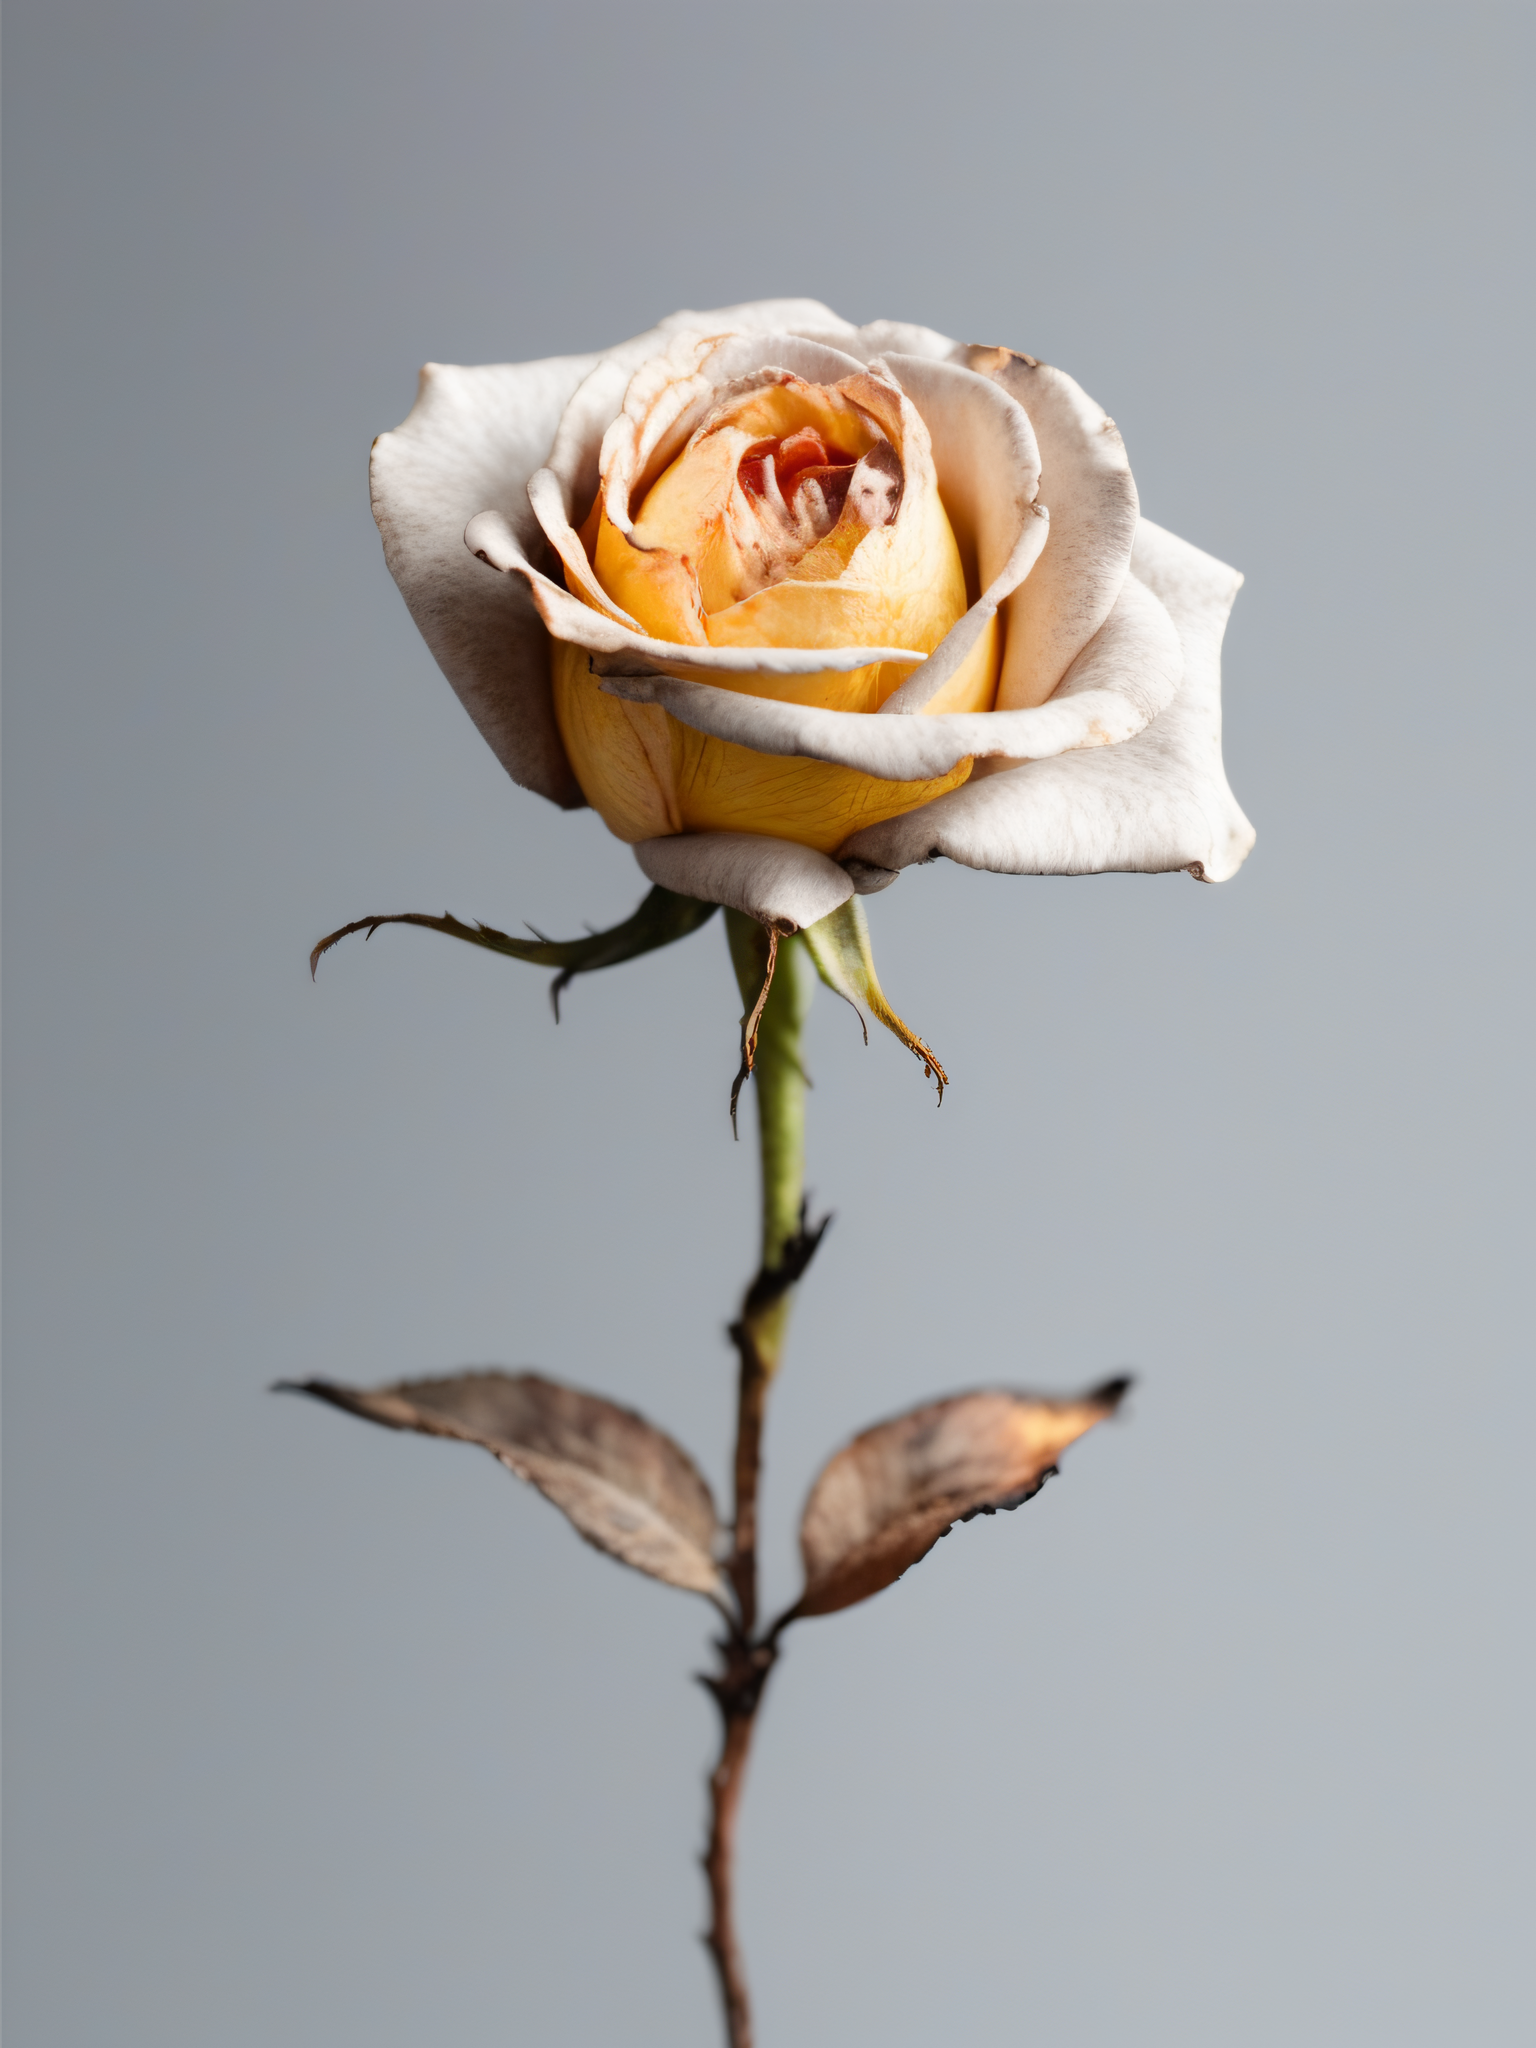 Dried white rose